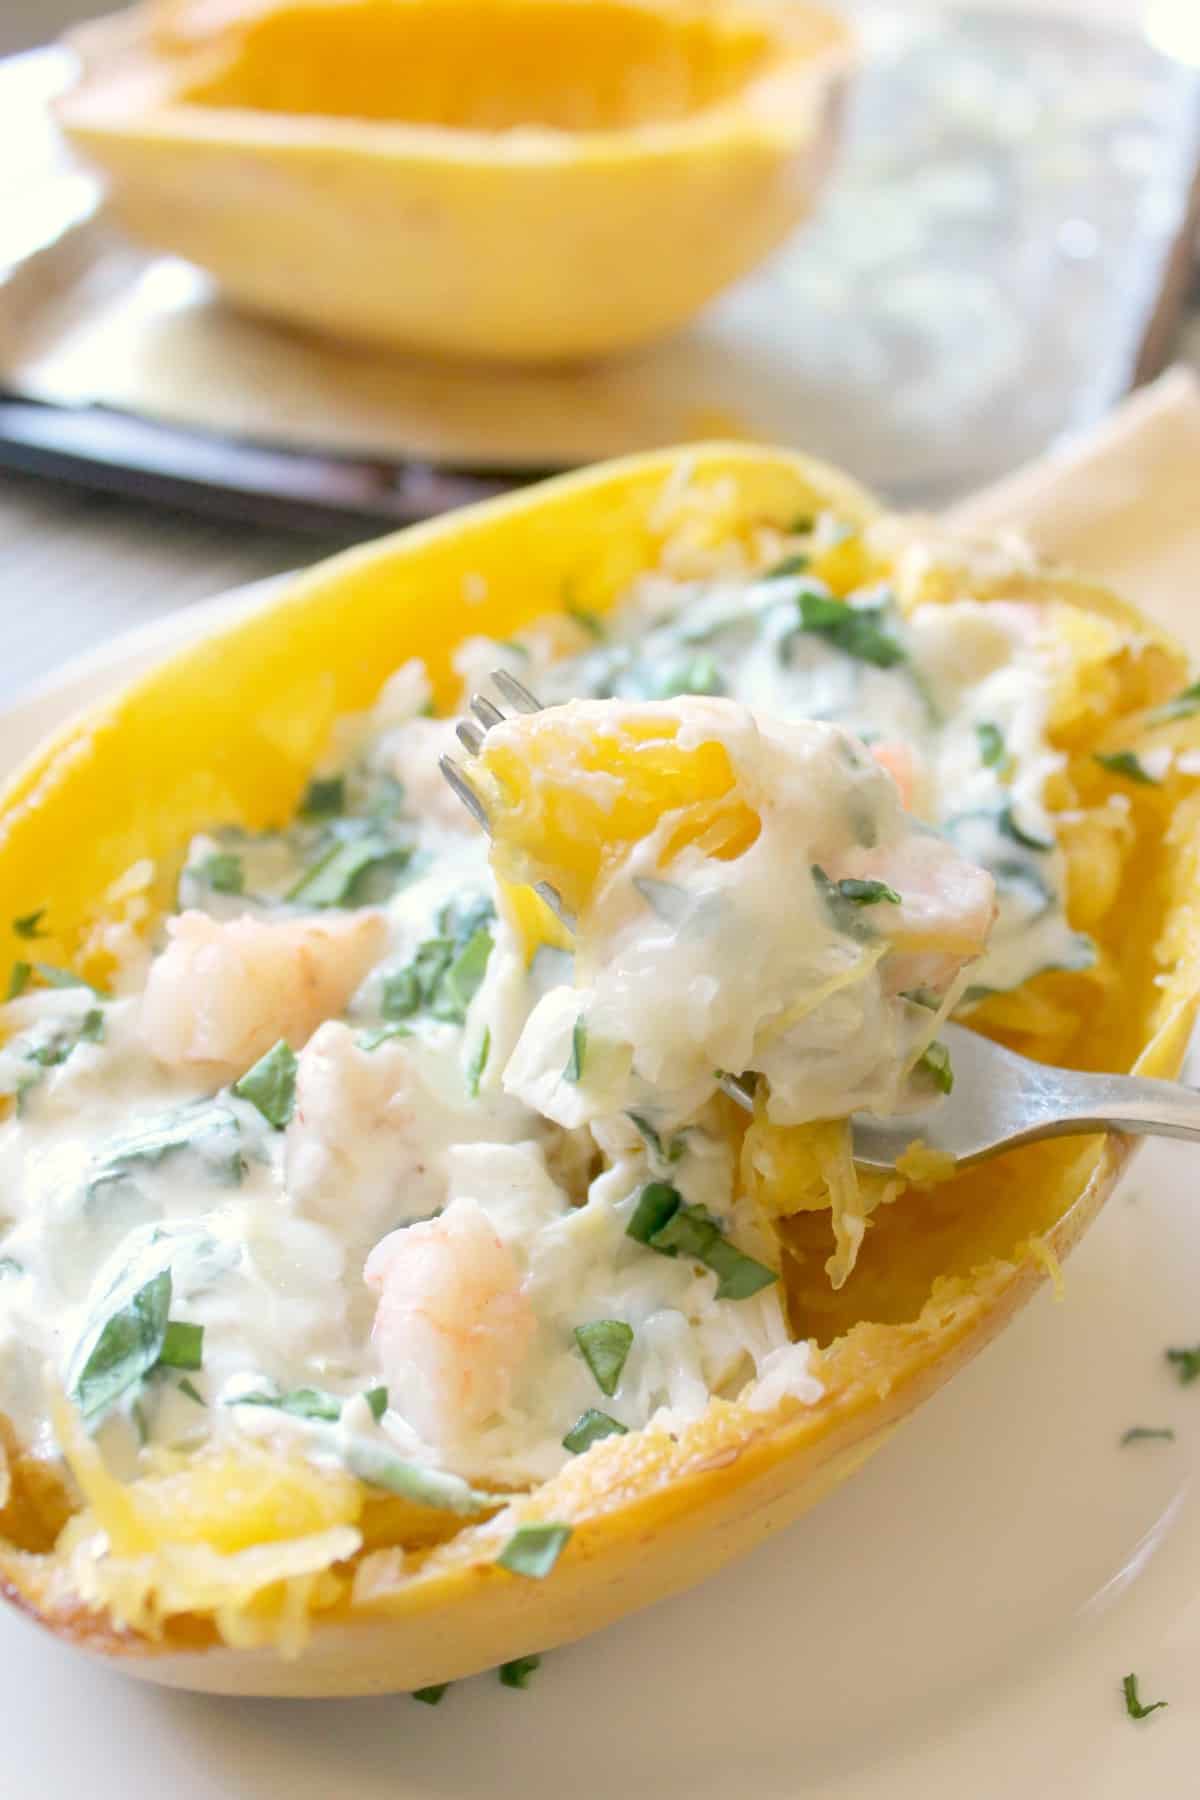 A perfect forkful of creamy shrimp in a spinach and artichoke cream sauce with roasted spaghetti squash